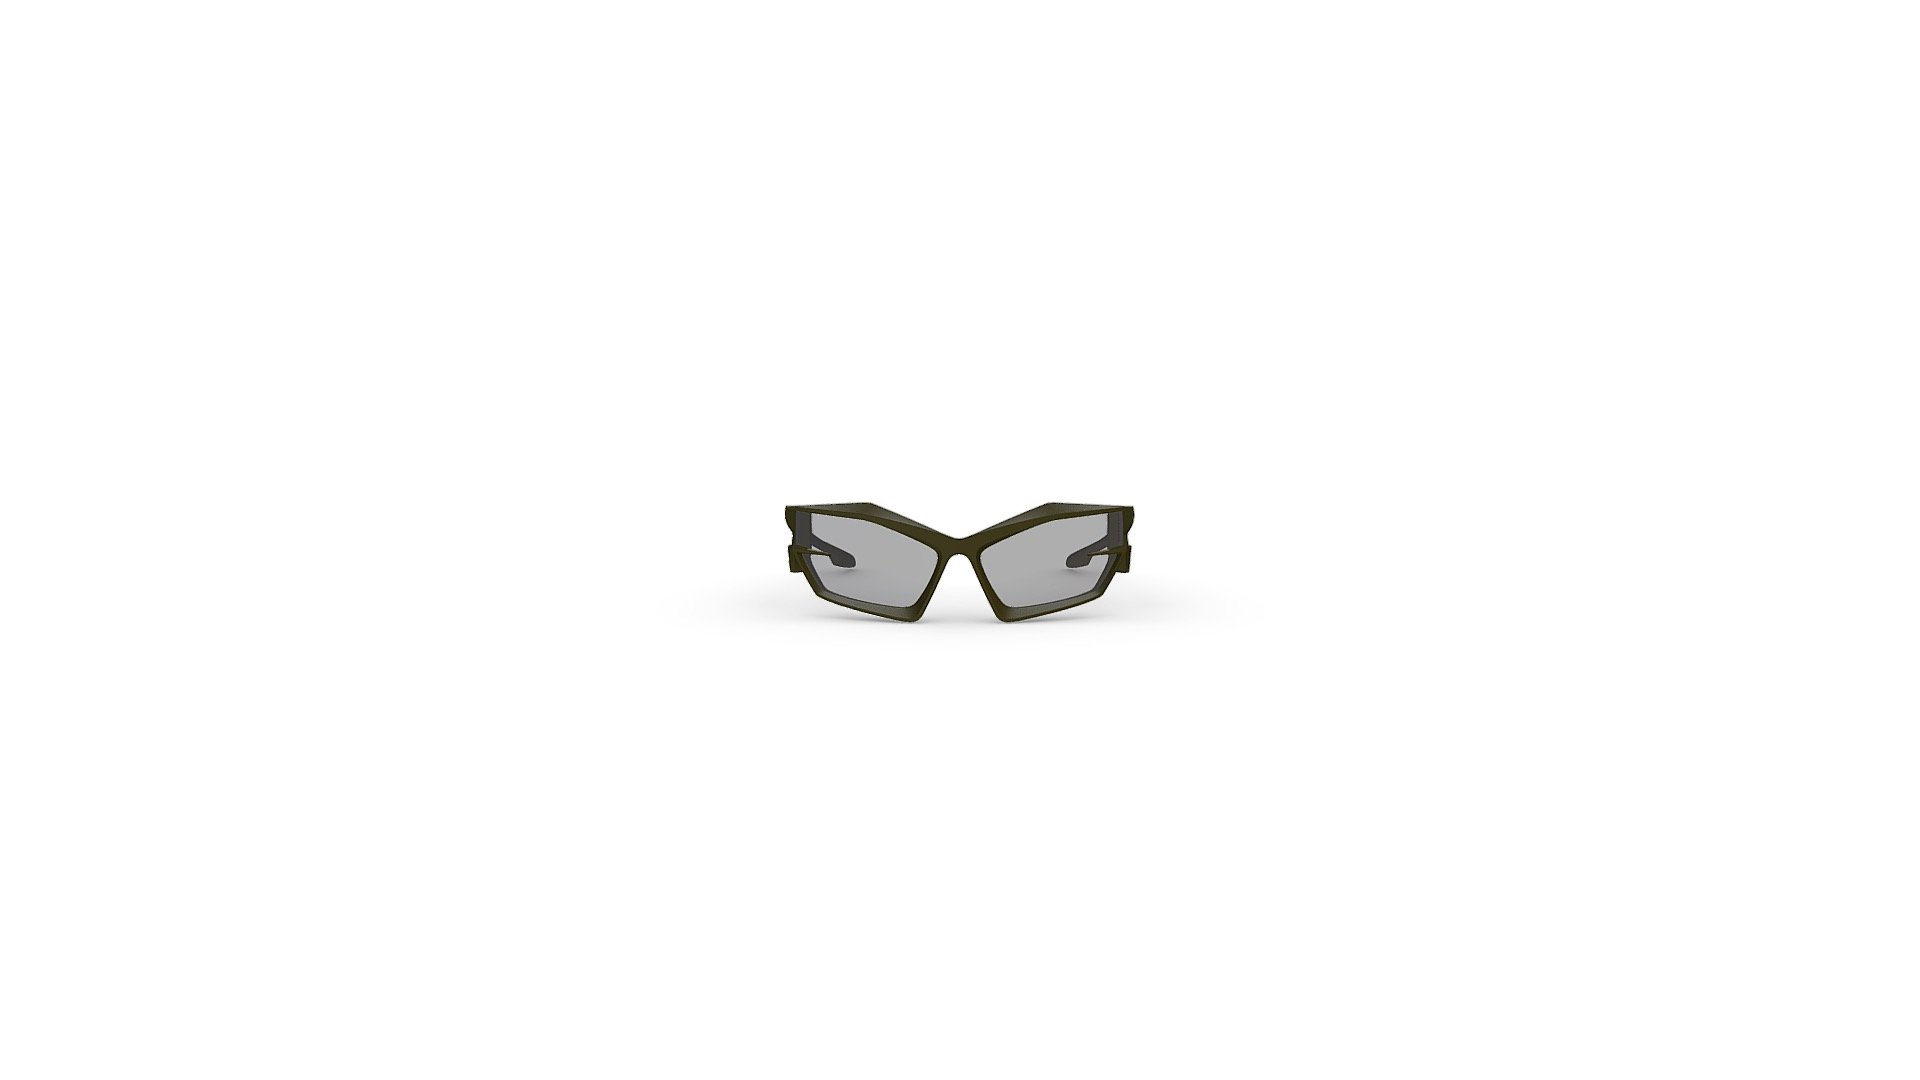 G Sunglasses in khaki - 3D model by Givenchy 3d model